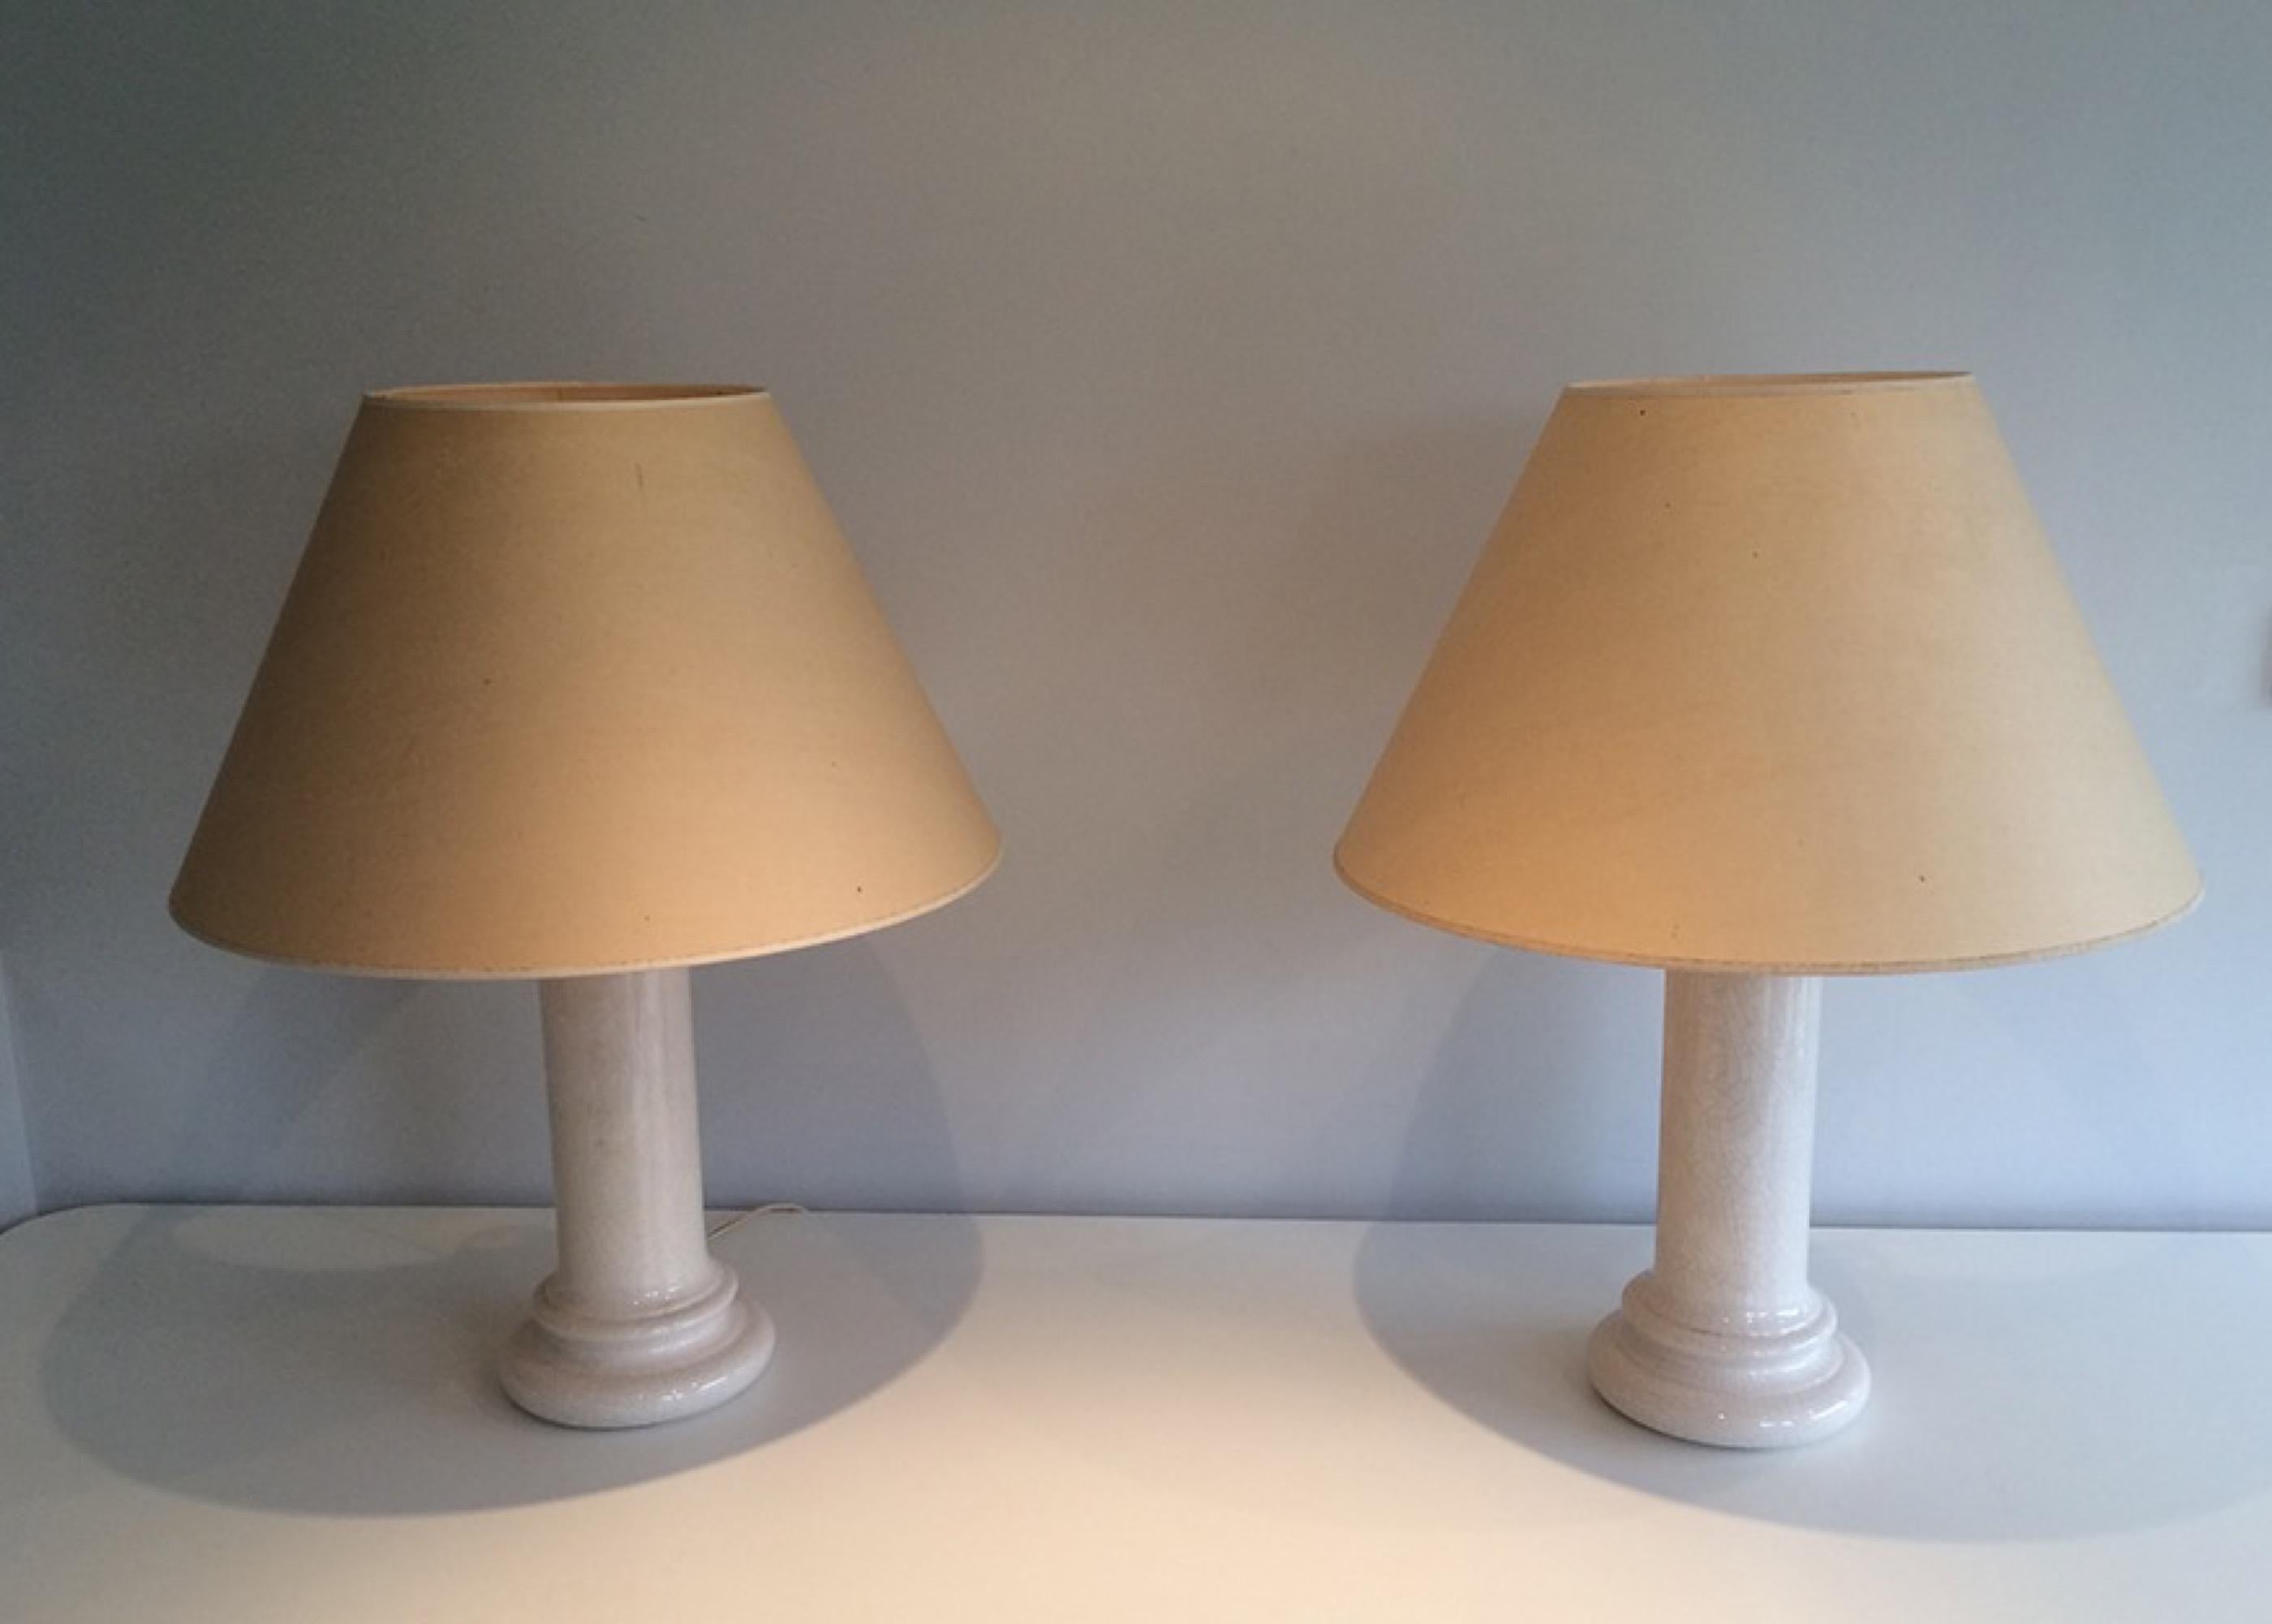 Pair of White Cracked Ceramic Lamps, circa 1970 For Sale 6